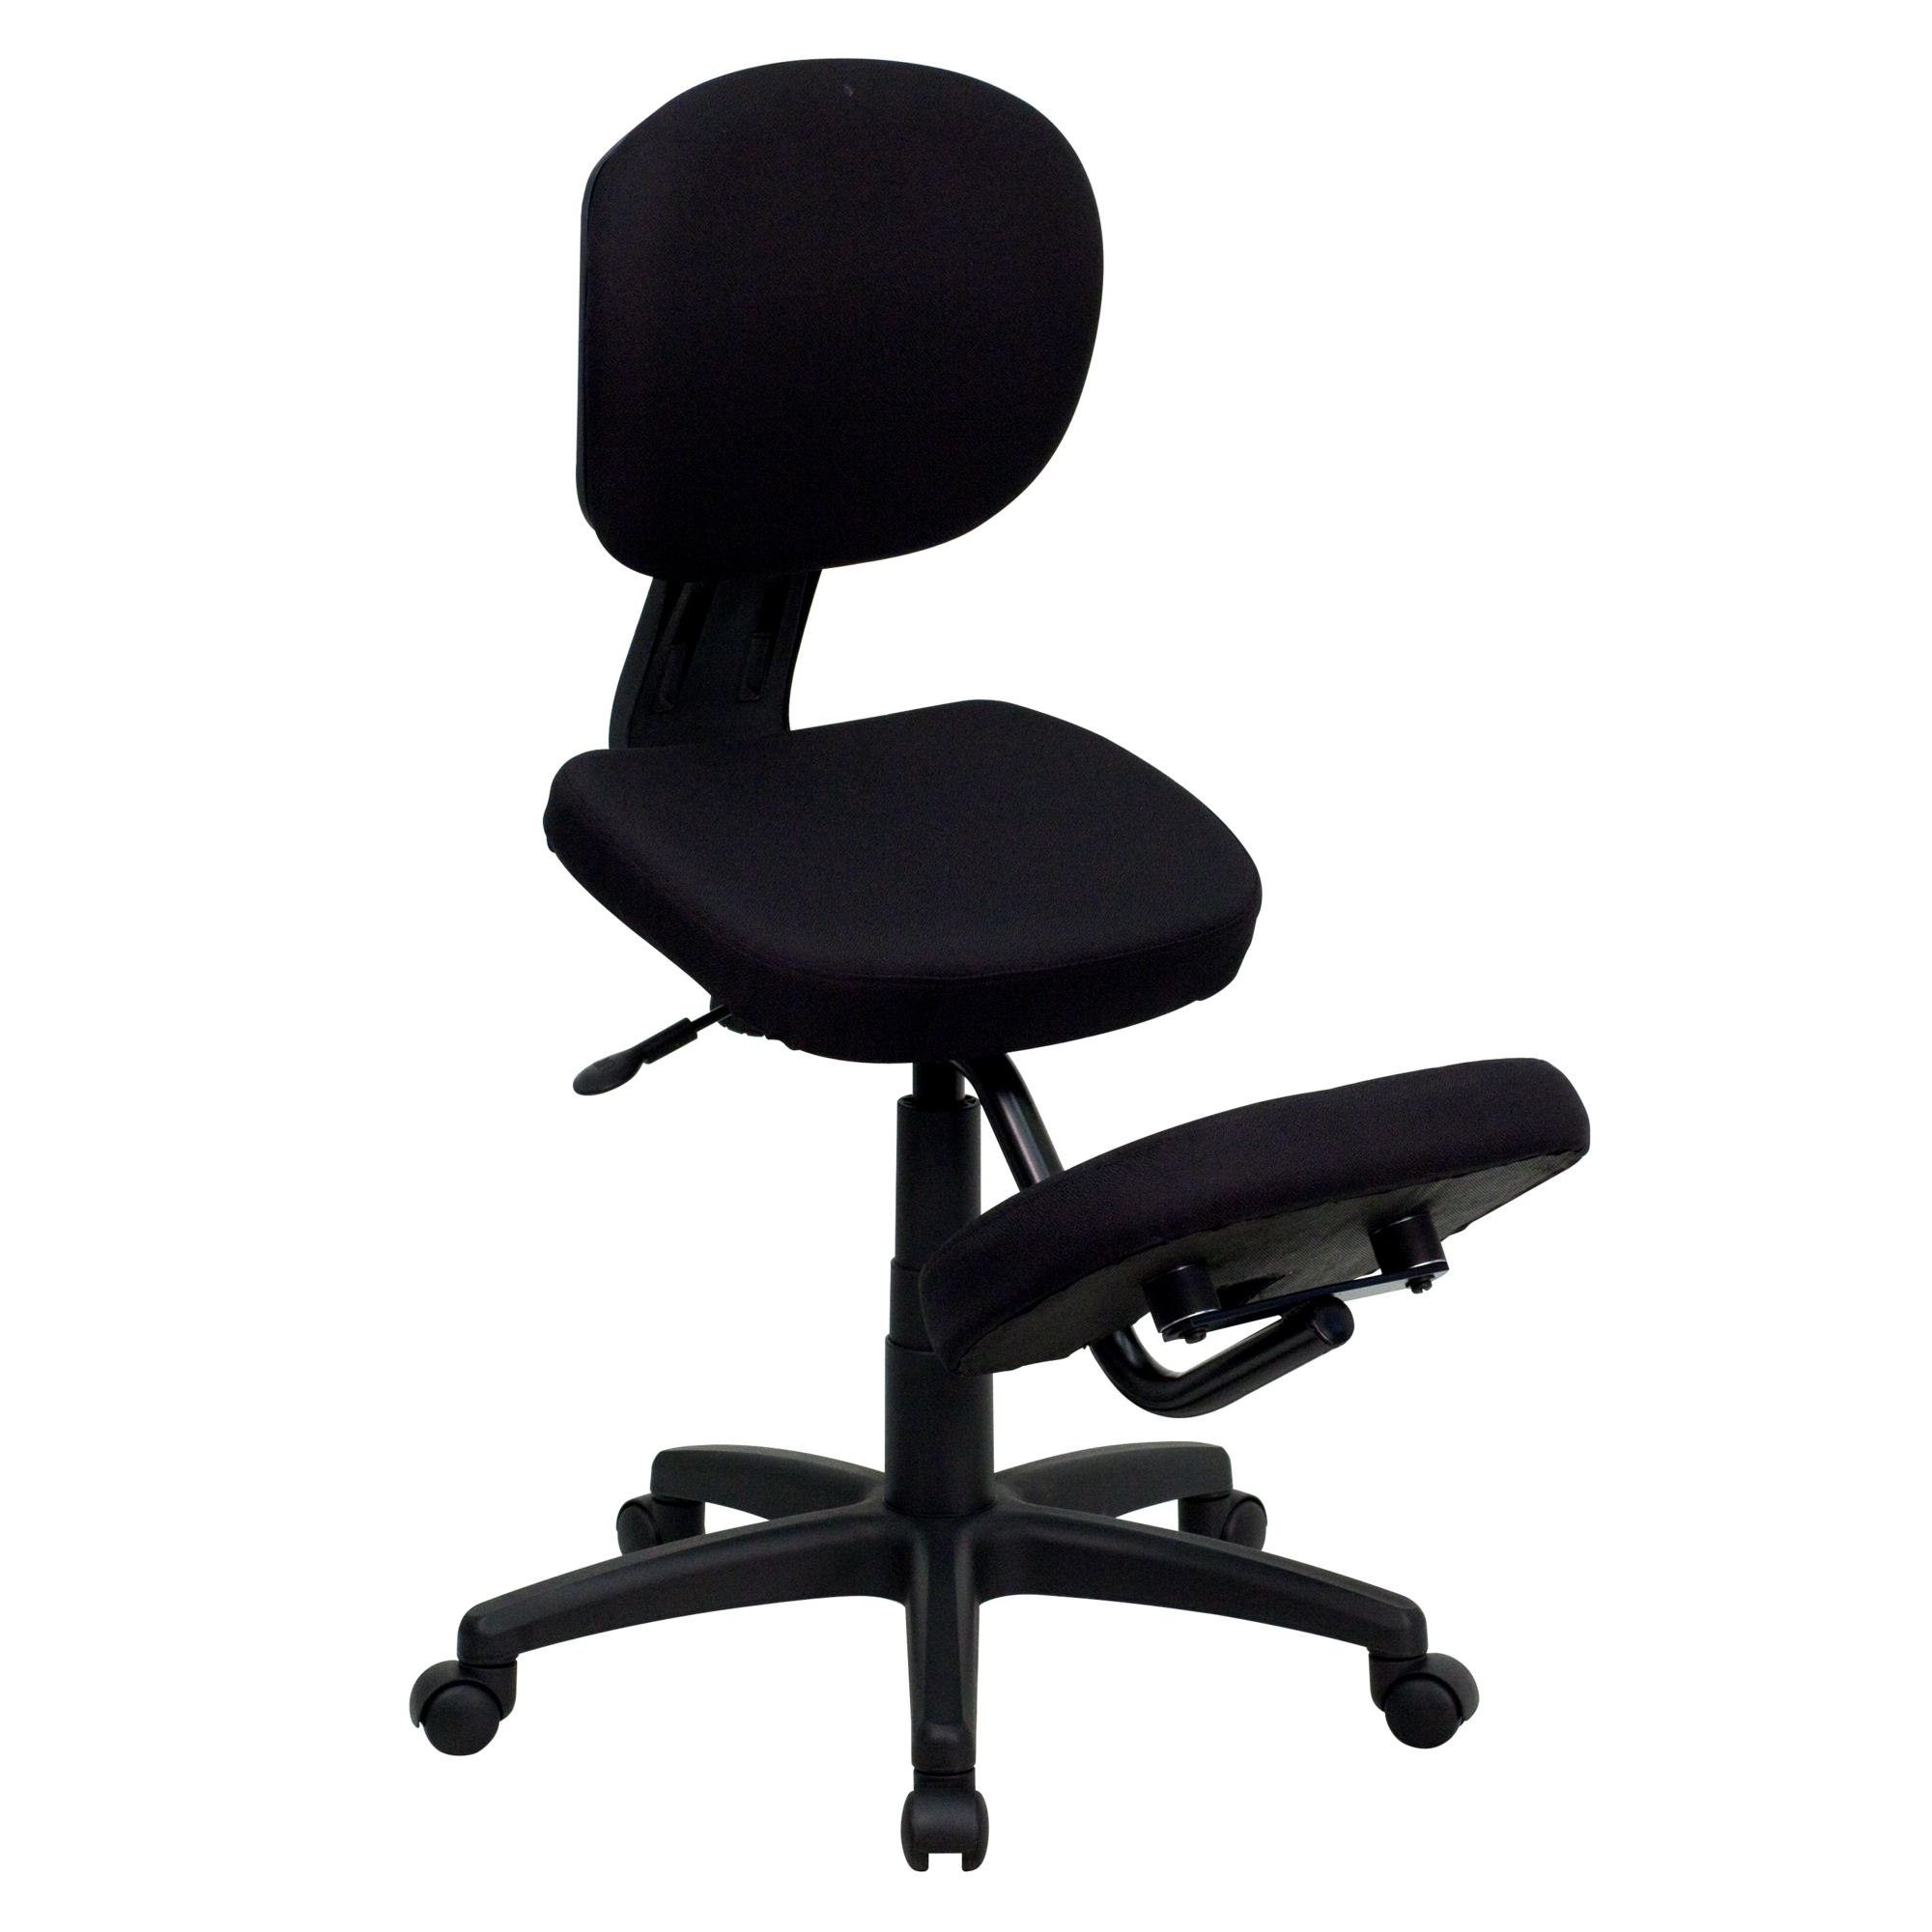 Flash Furniture, Black Fabric Kneeling Posture Task Chair with Back, Primary Color Black, Included (qty.) 1, Model WL1430